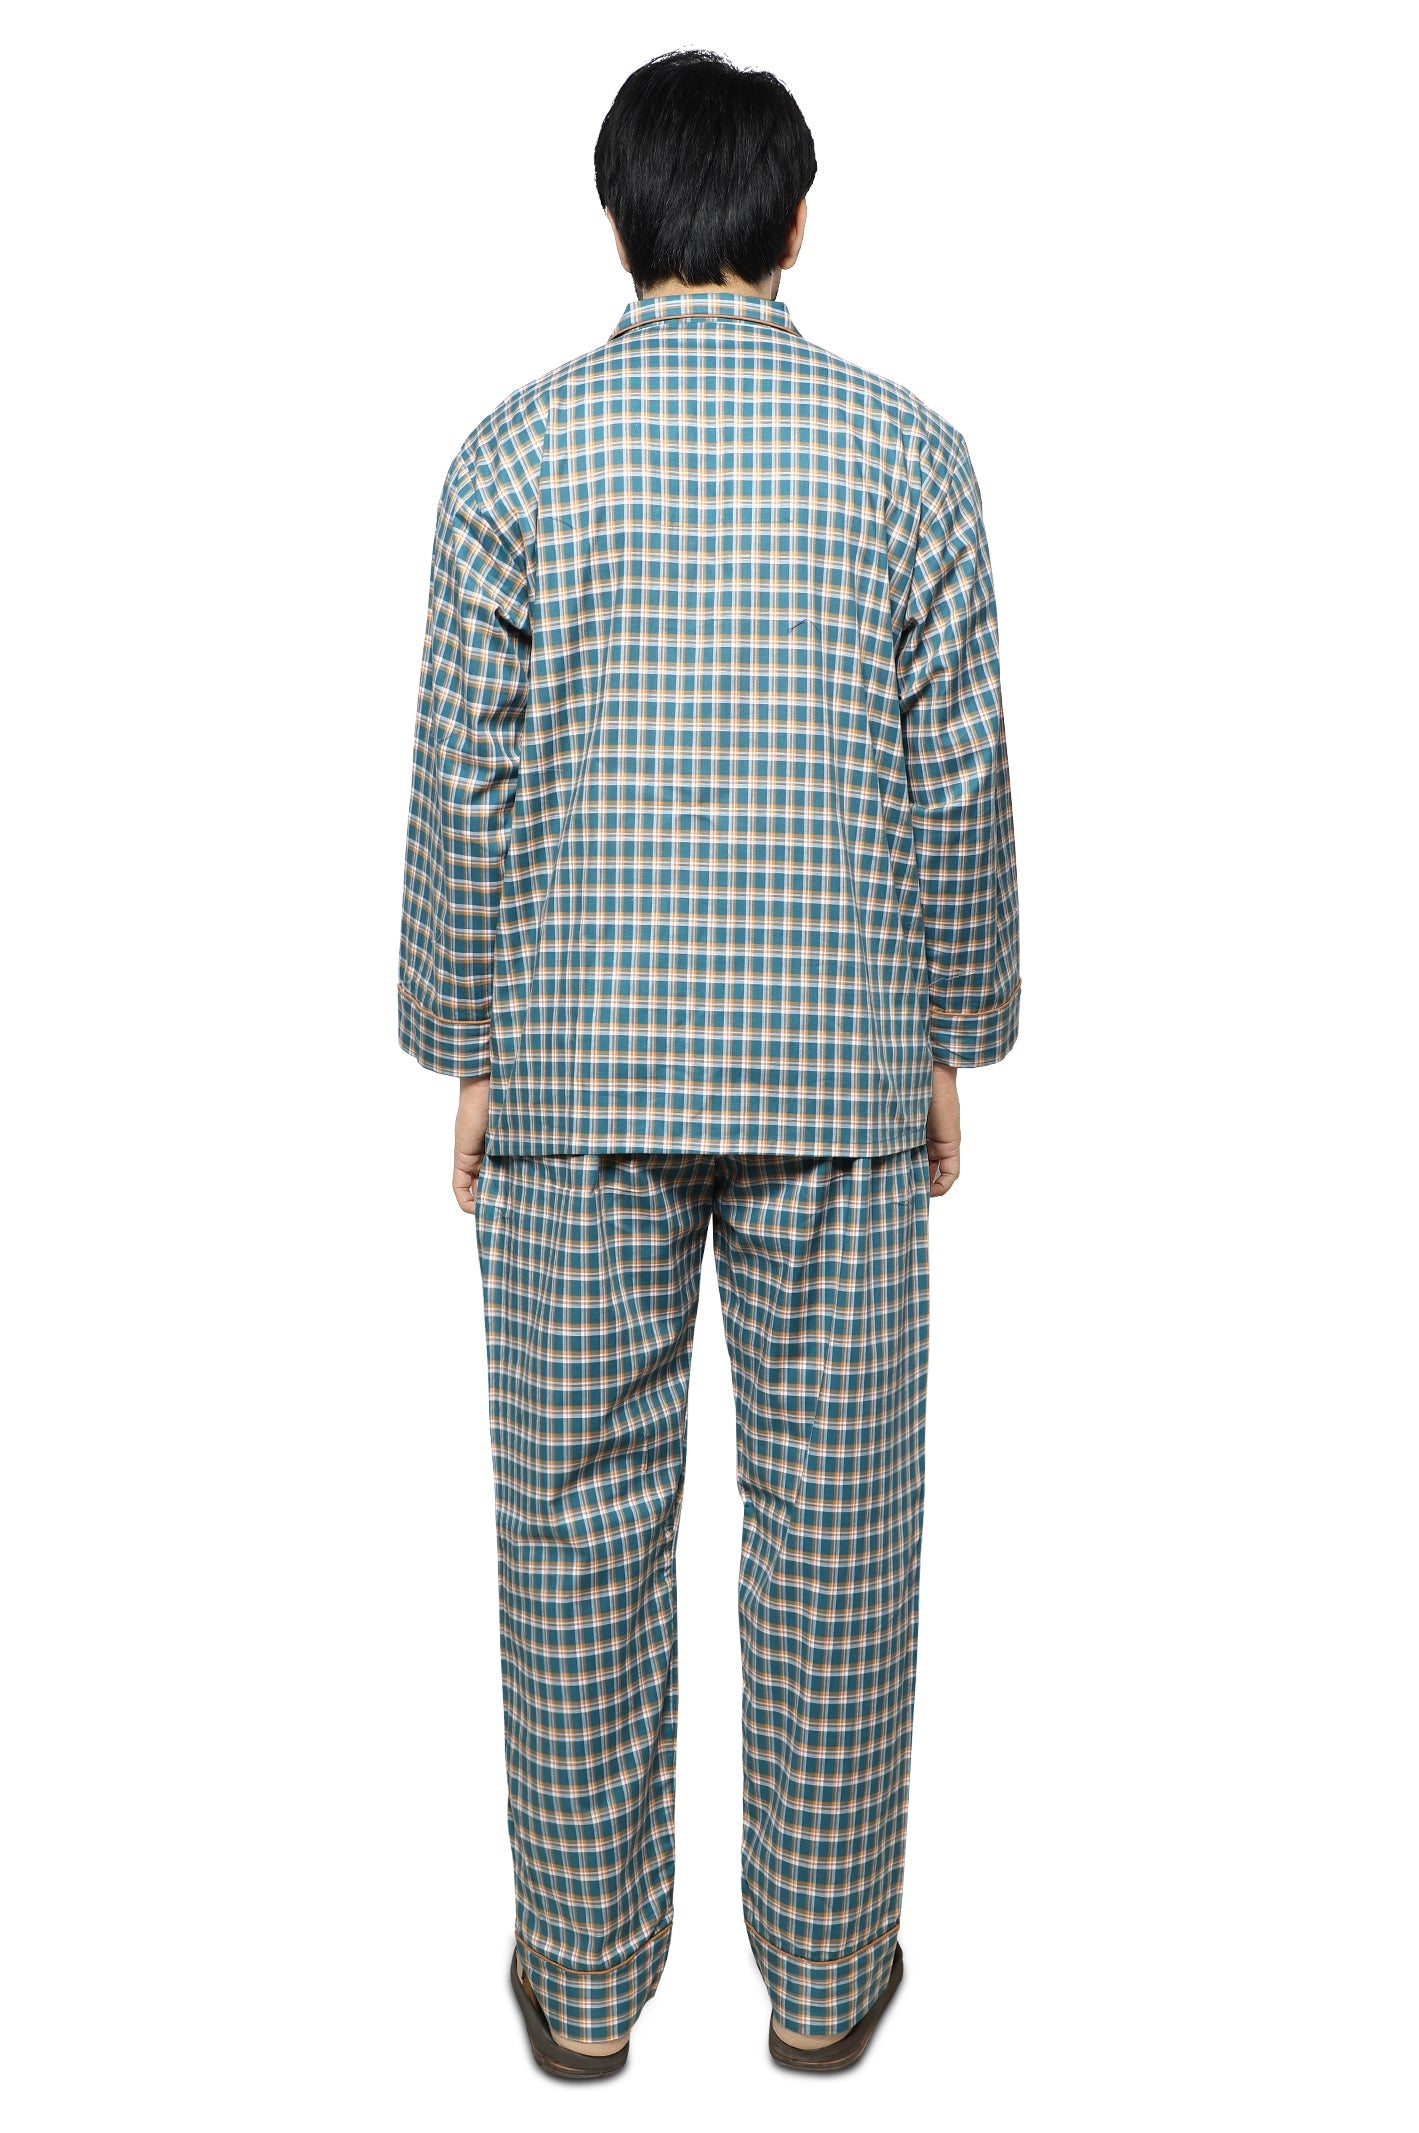 Diner's Night Suit for Men SKU: FNS019-GREEN - Diners